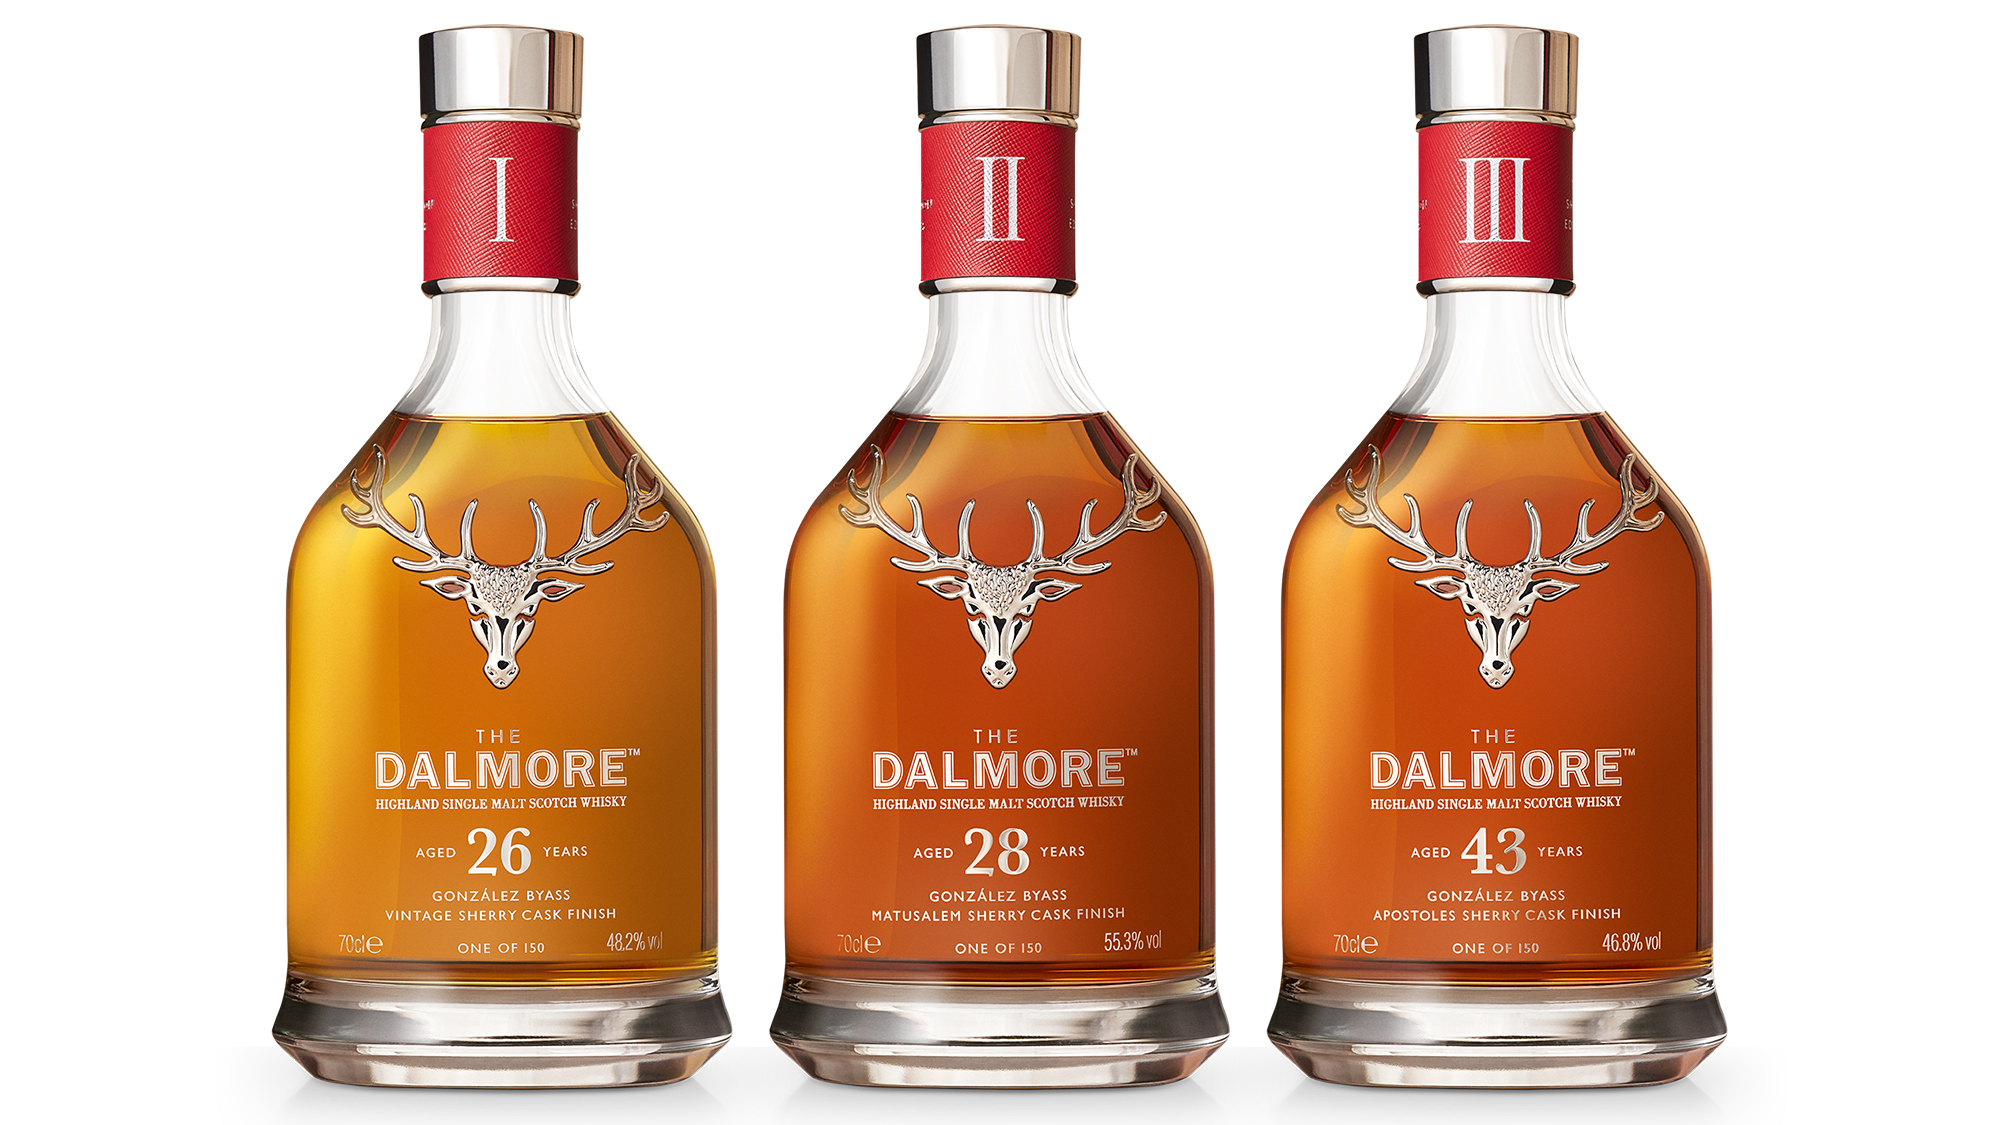 Dalmore Cask Curation Sherry Edition